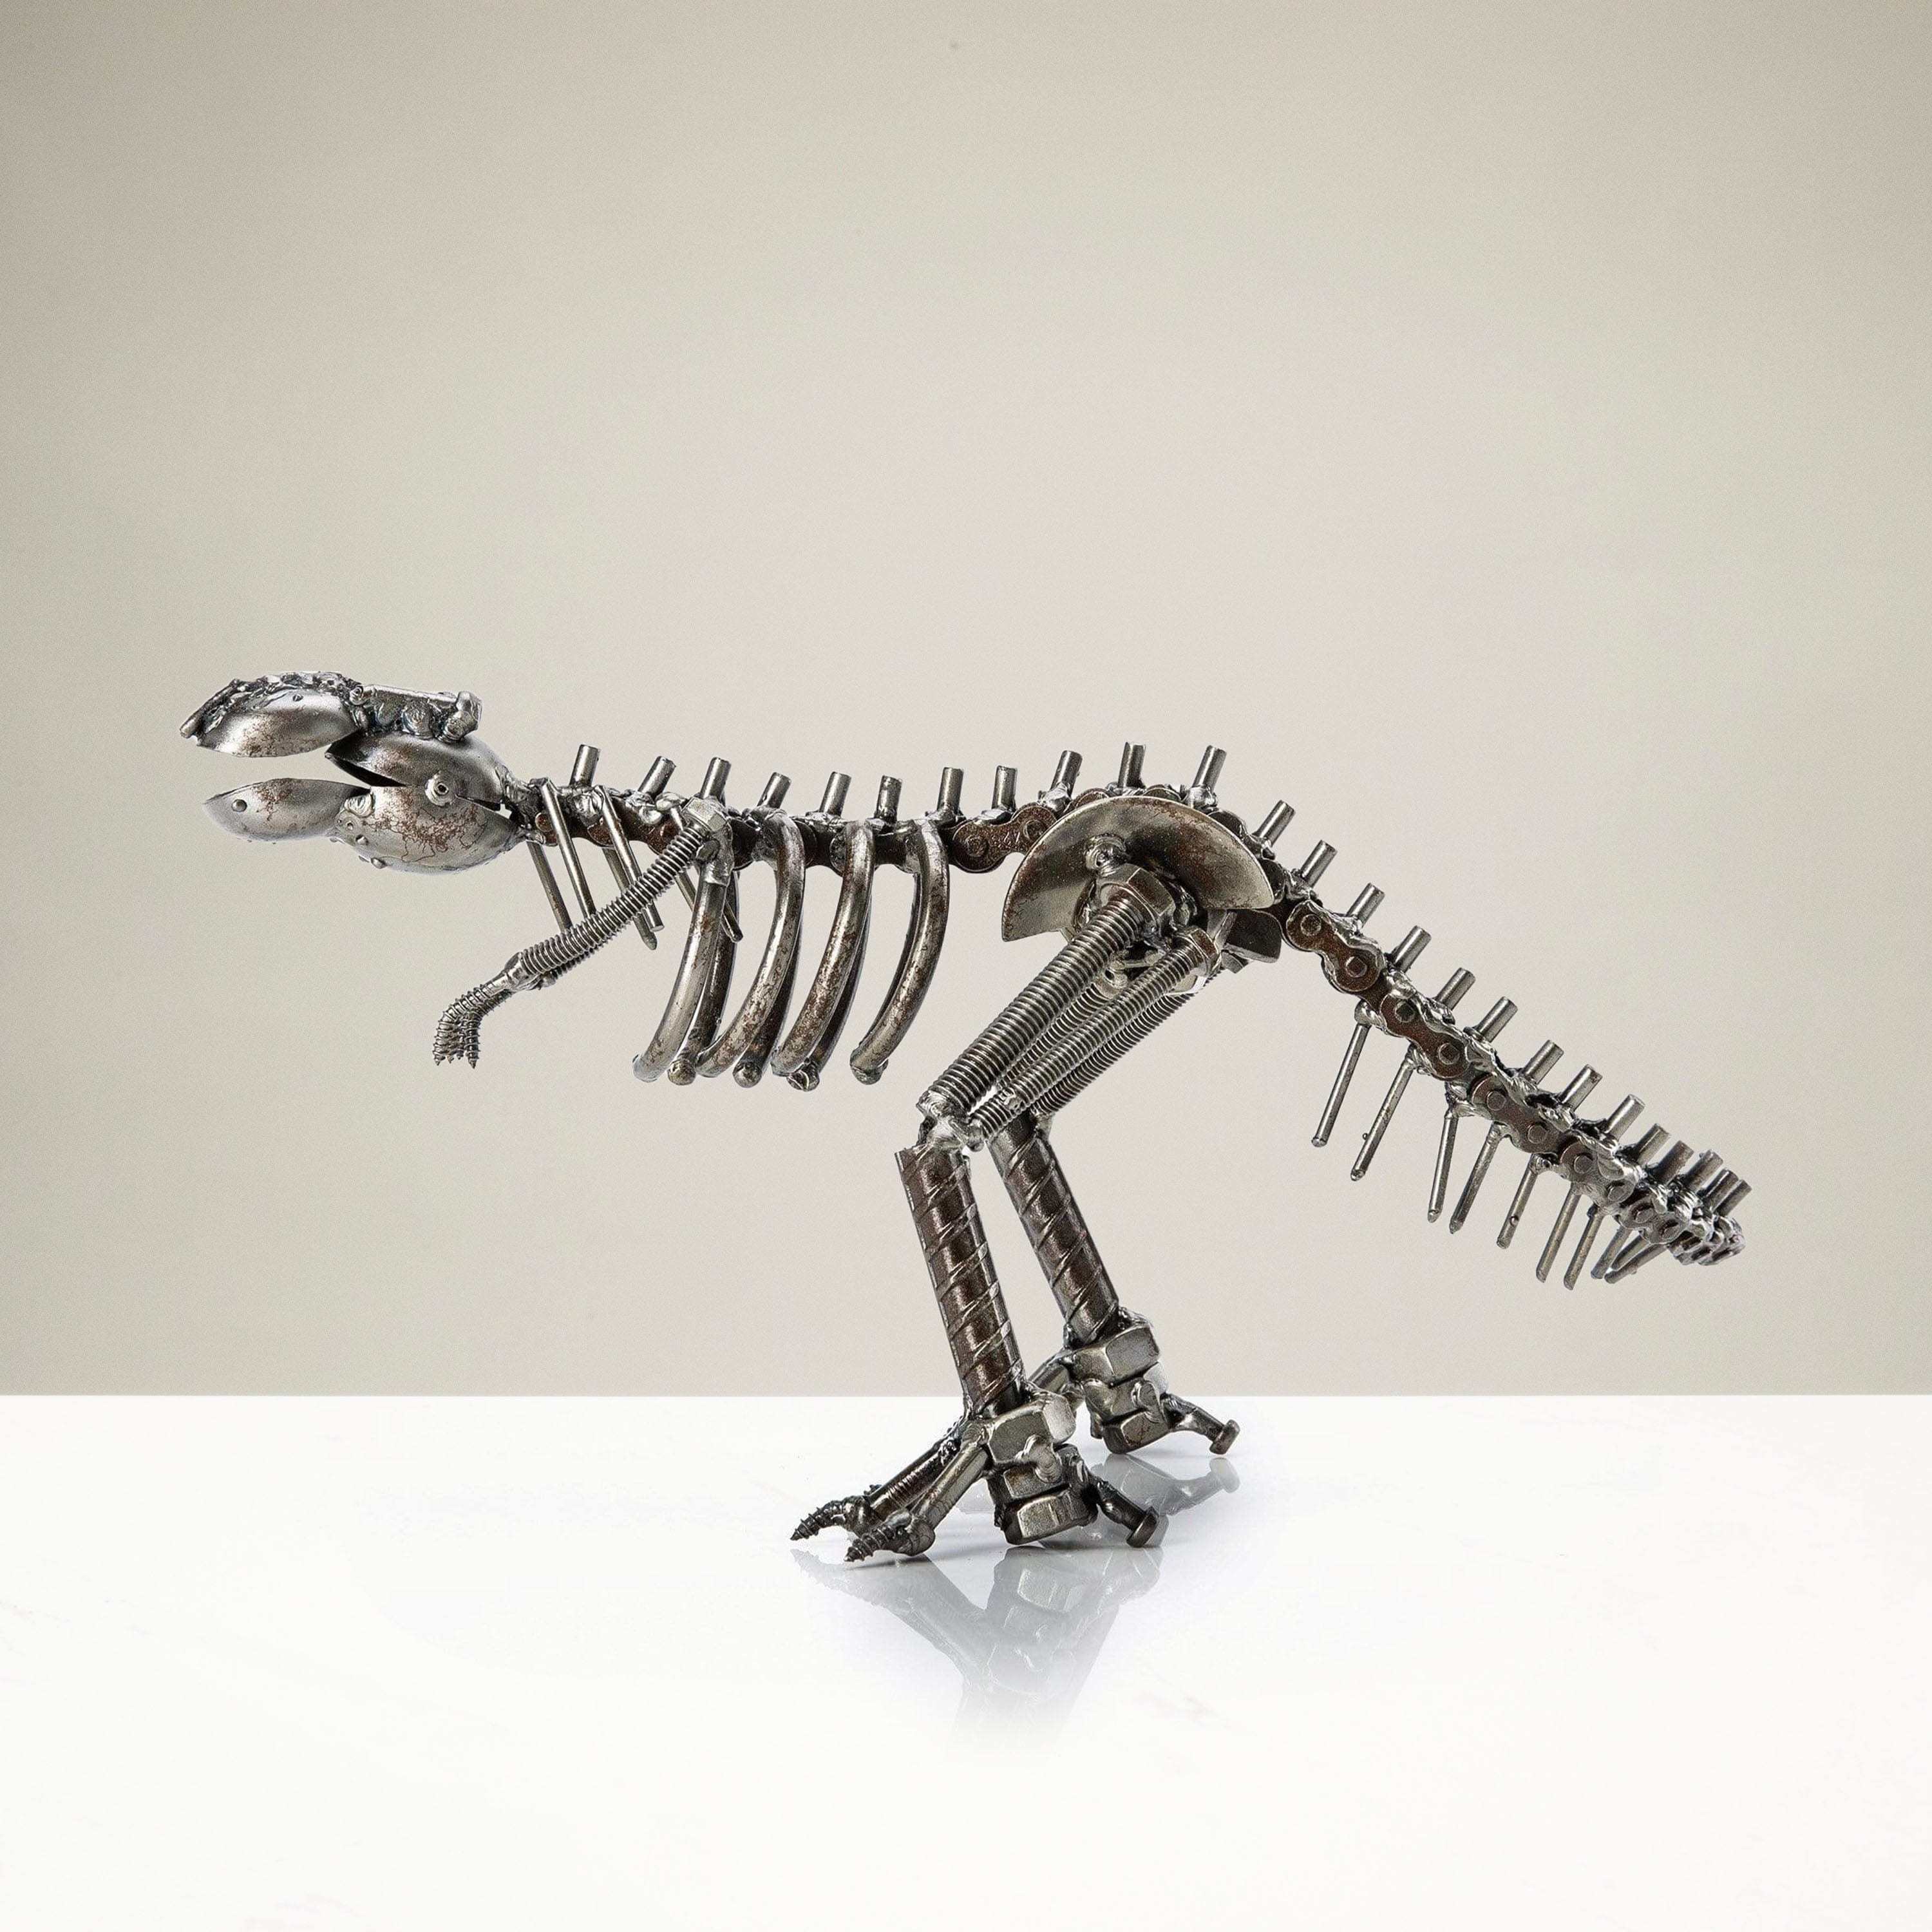 Kalifano Recycled Metal Art T-Rex Inspired Recycled Metal Sculpture RMS-500TRX-N